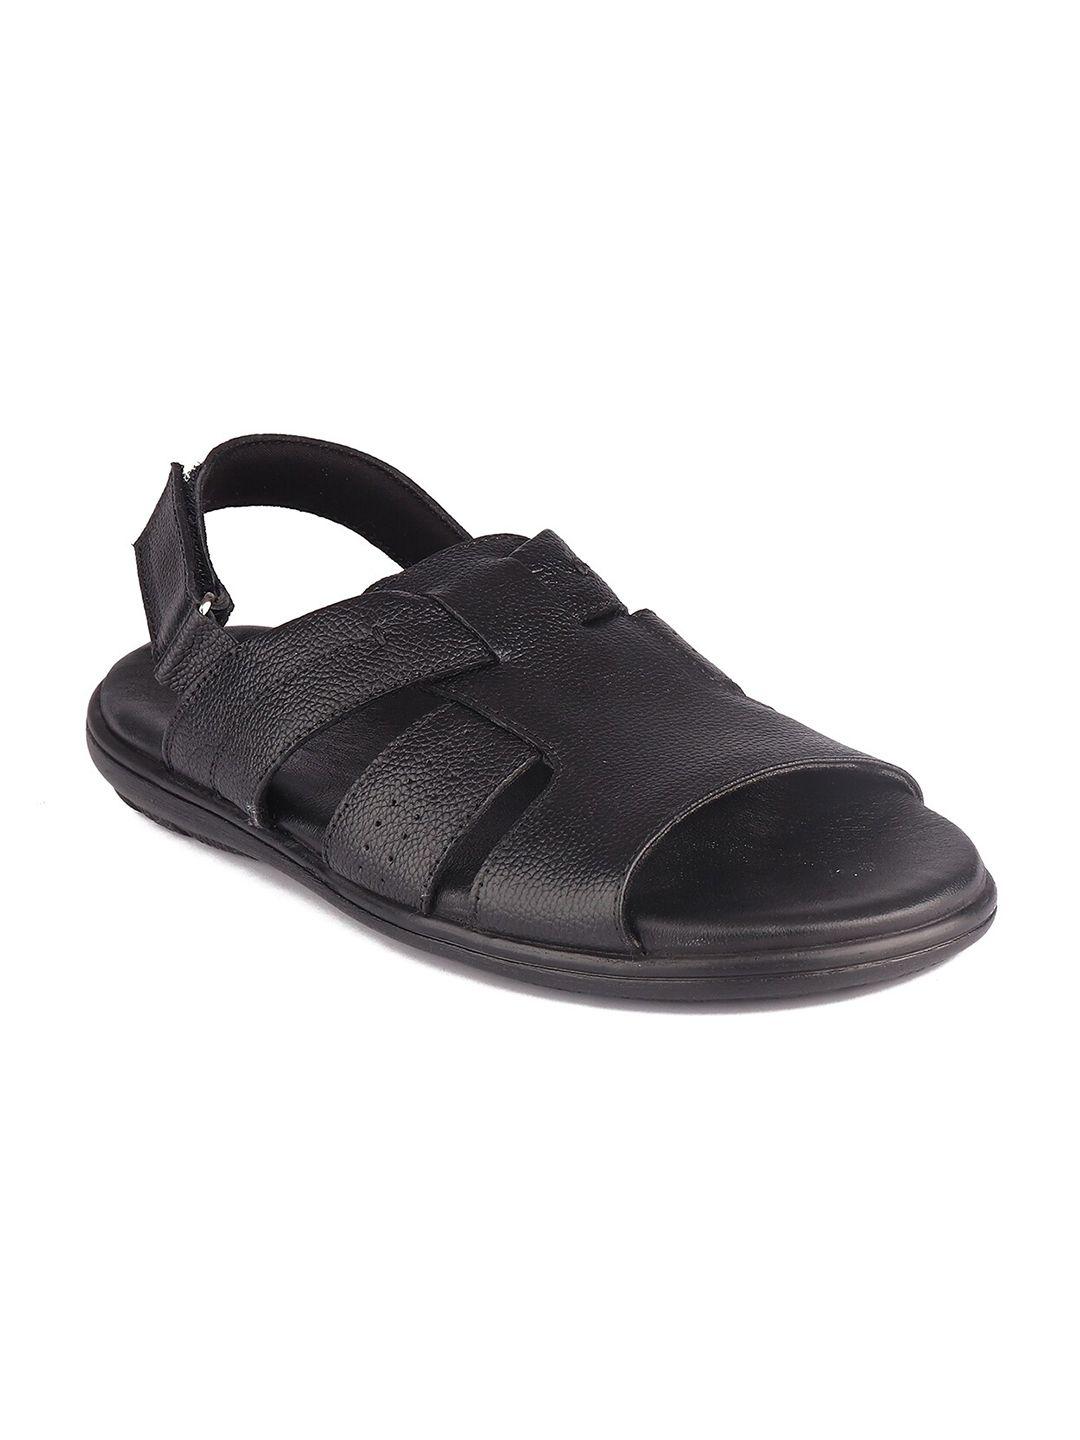 red chief men black leather fisherman sandals